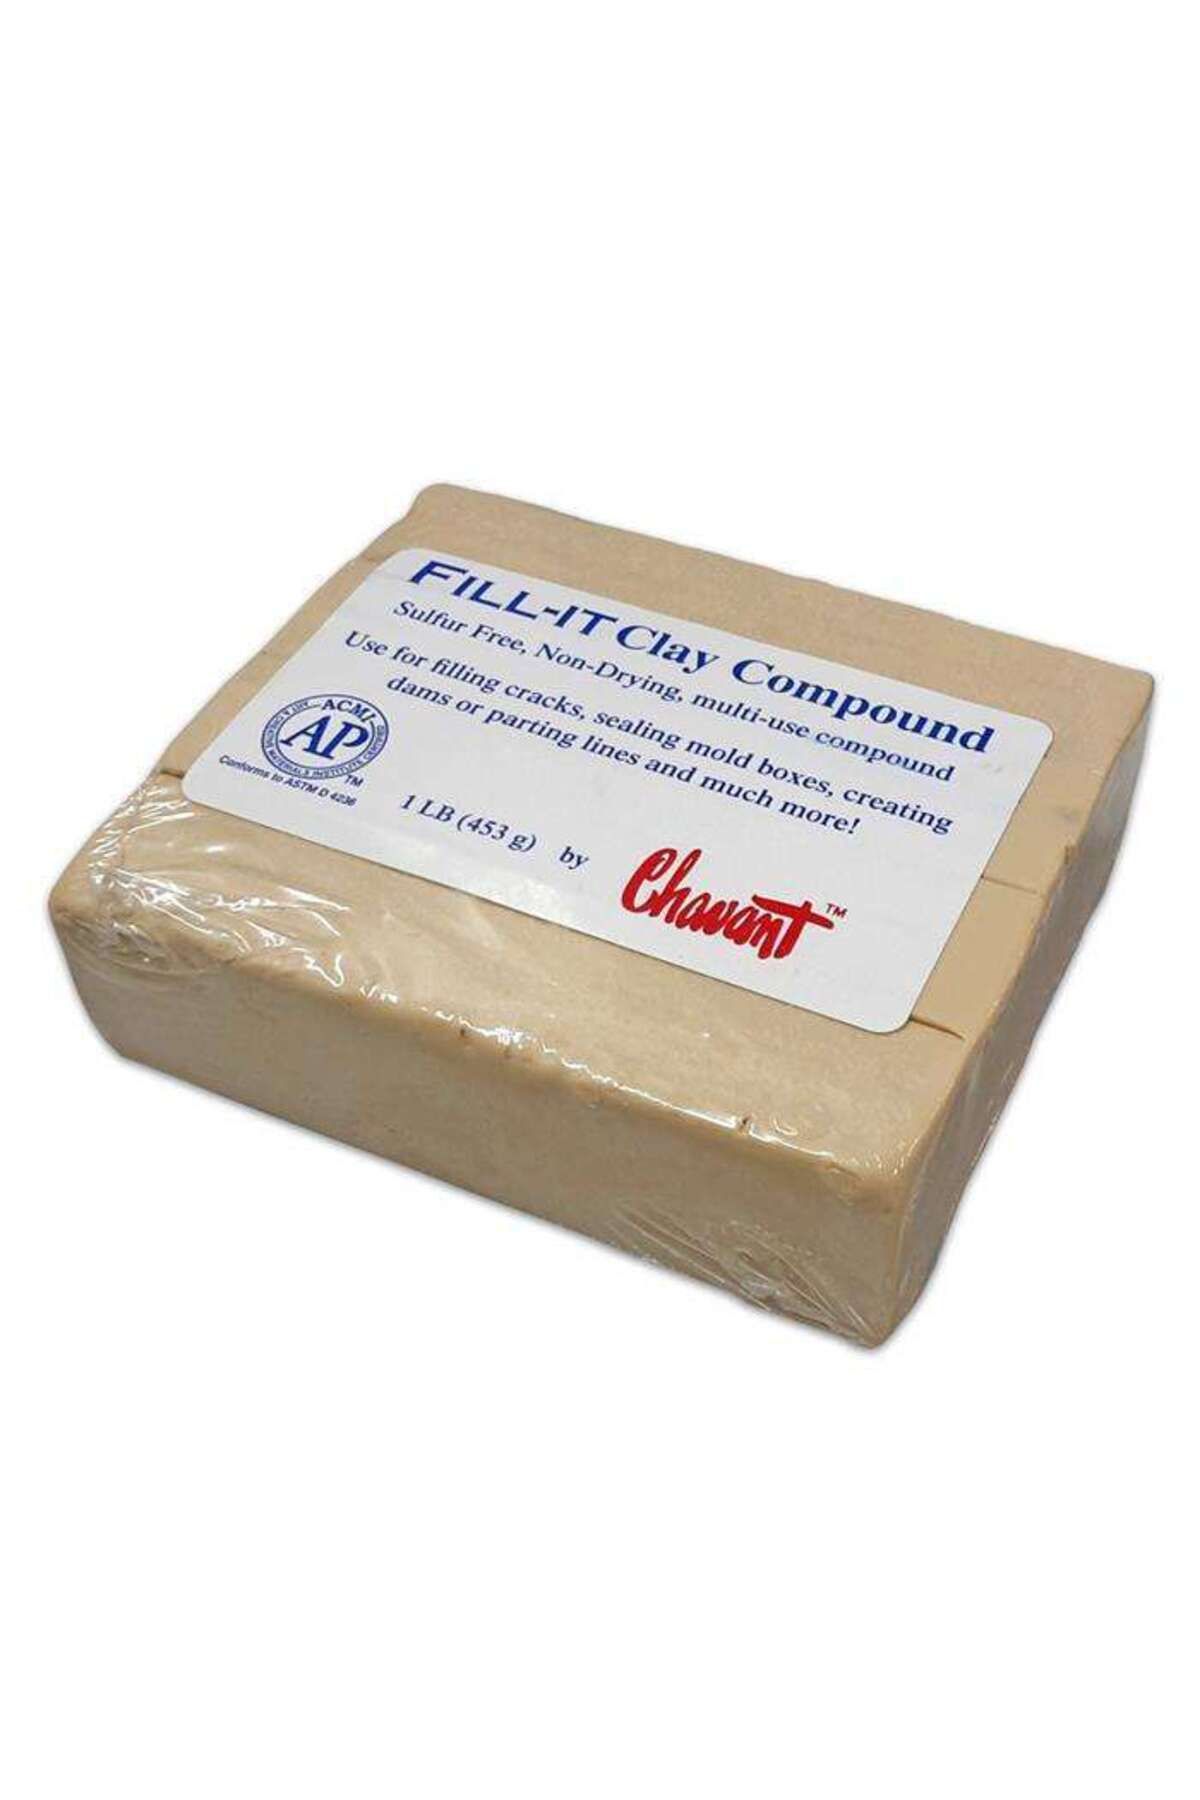 Chavant Fill It Clay Compound 453 G